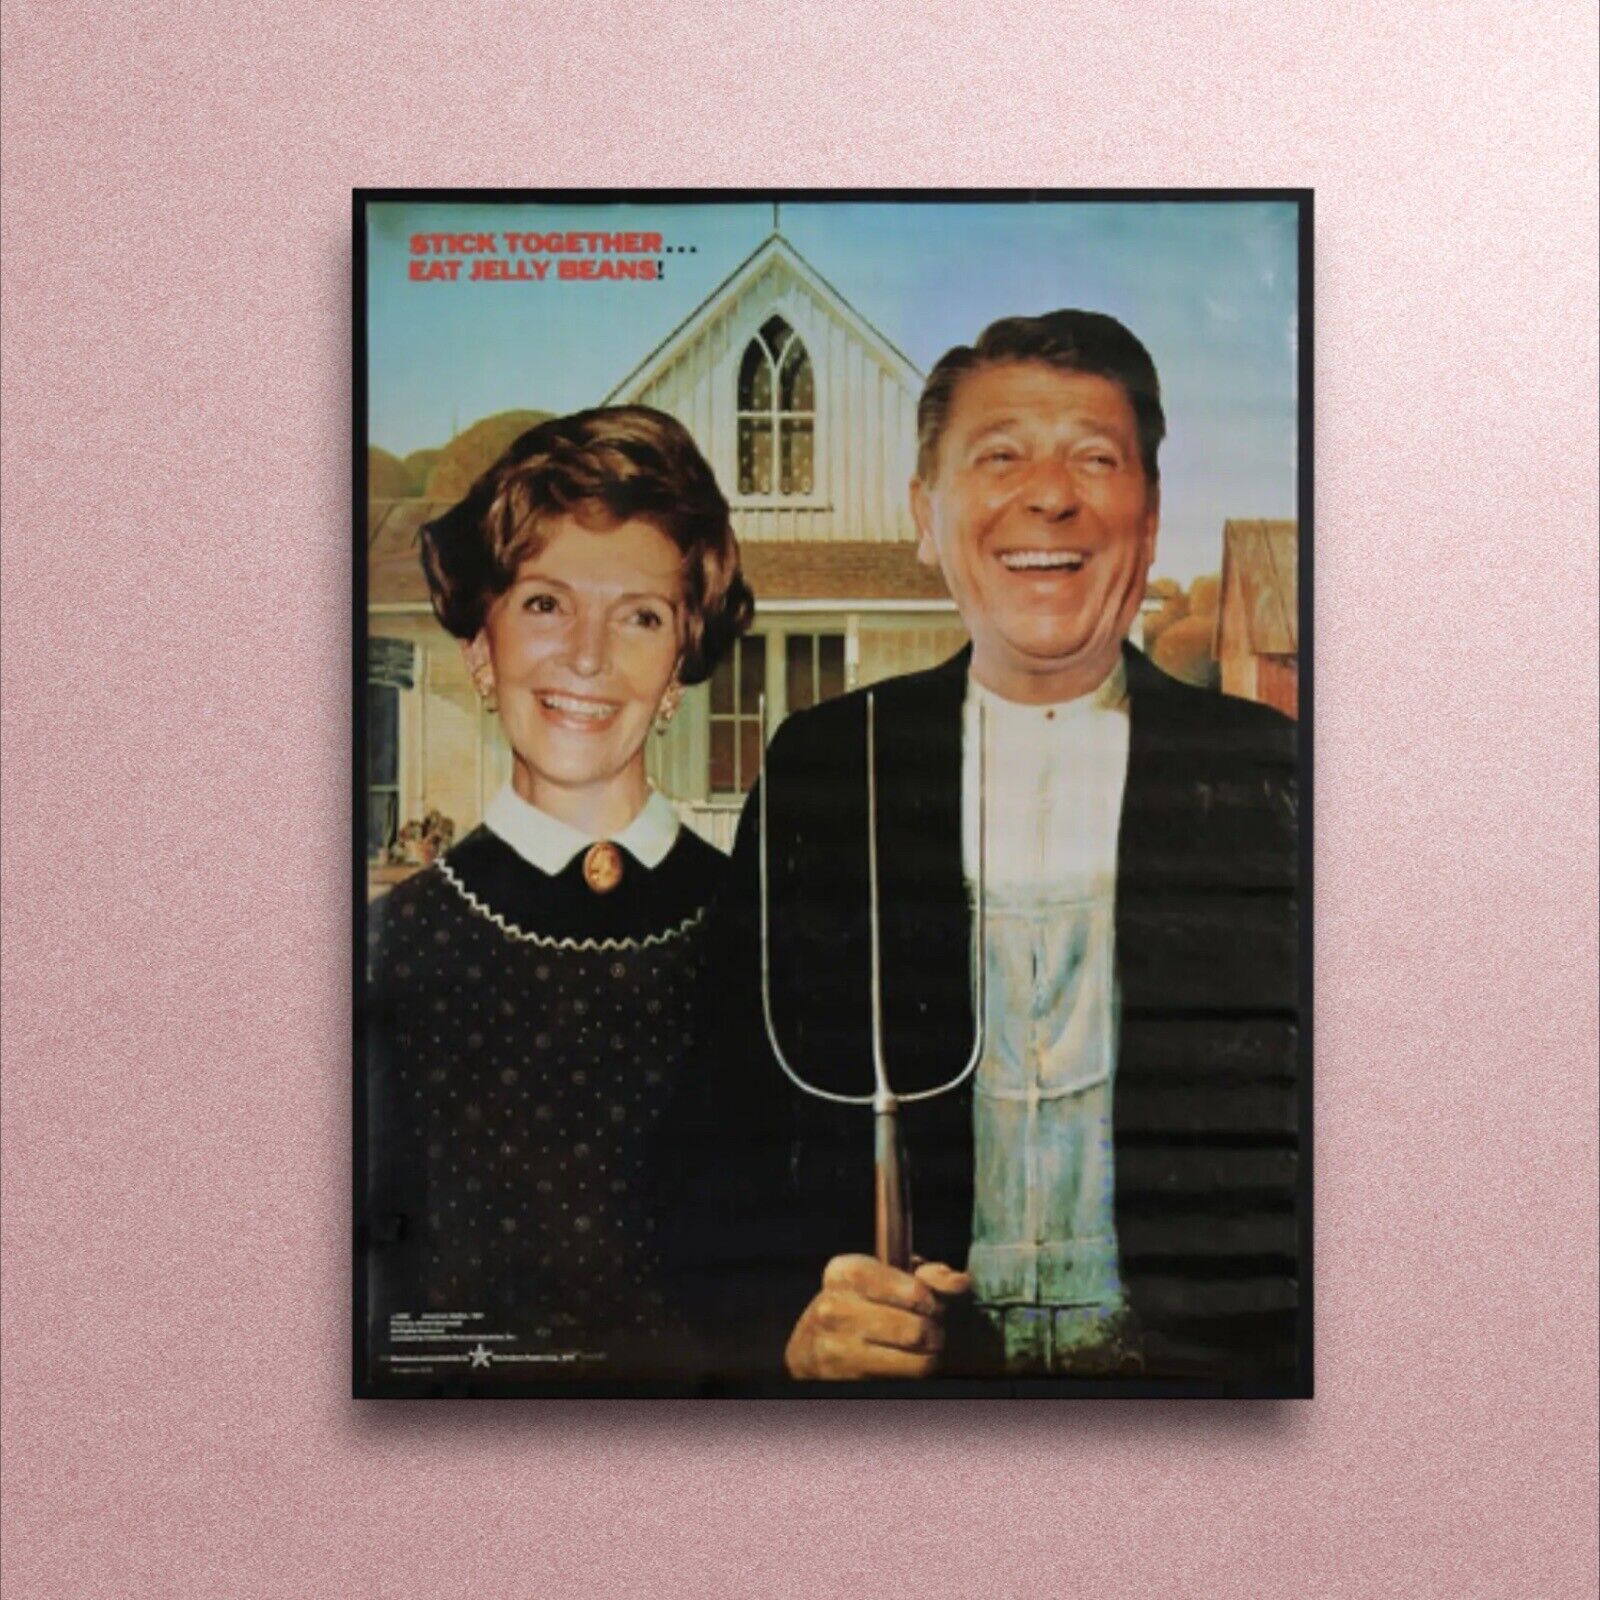 Vintage 1981 Ronald and Nancy Reagan “Stick Together…Eat Jellybeans” Poster